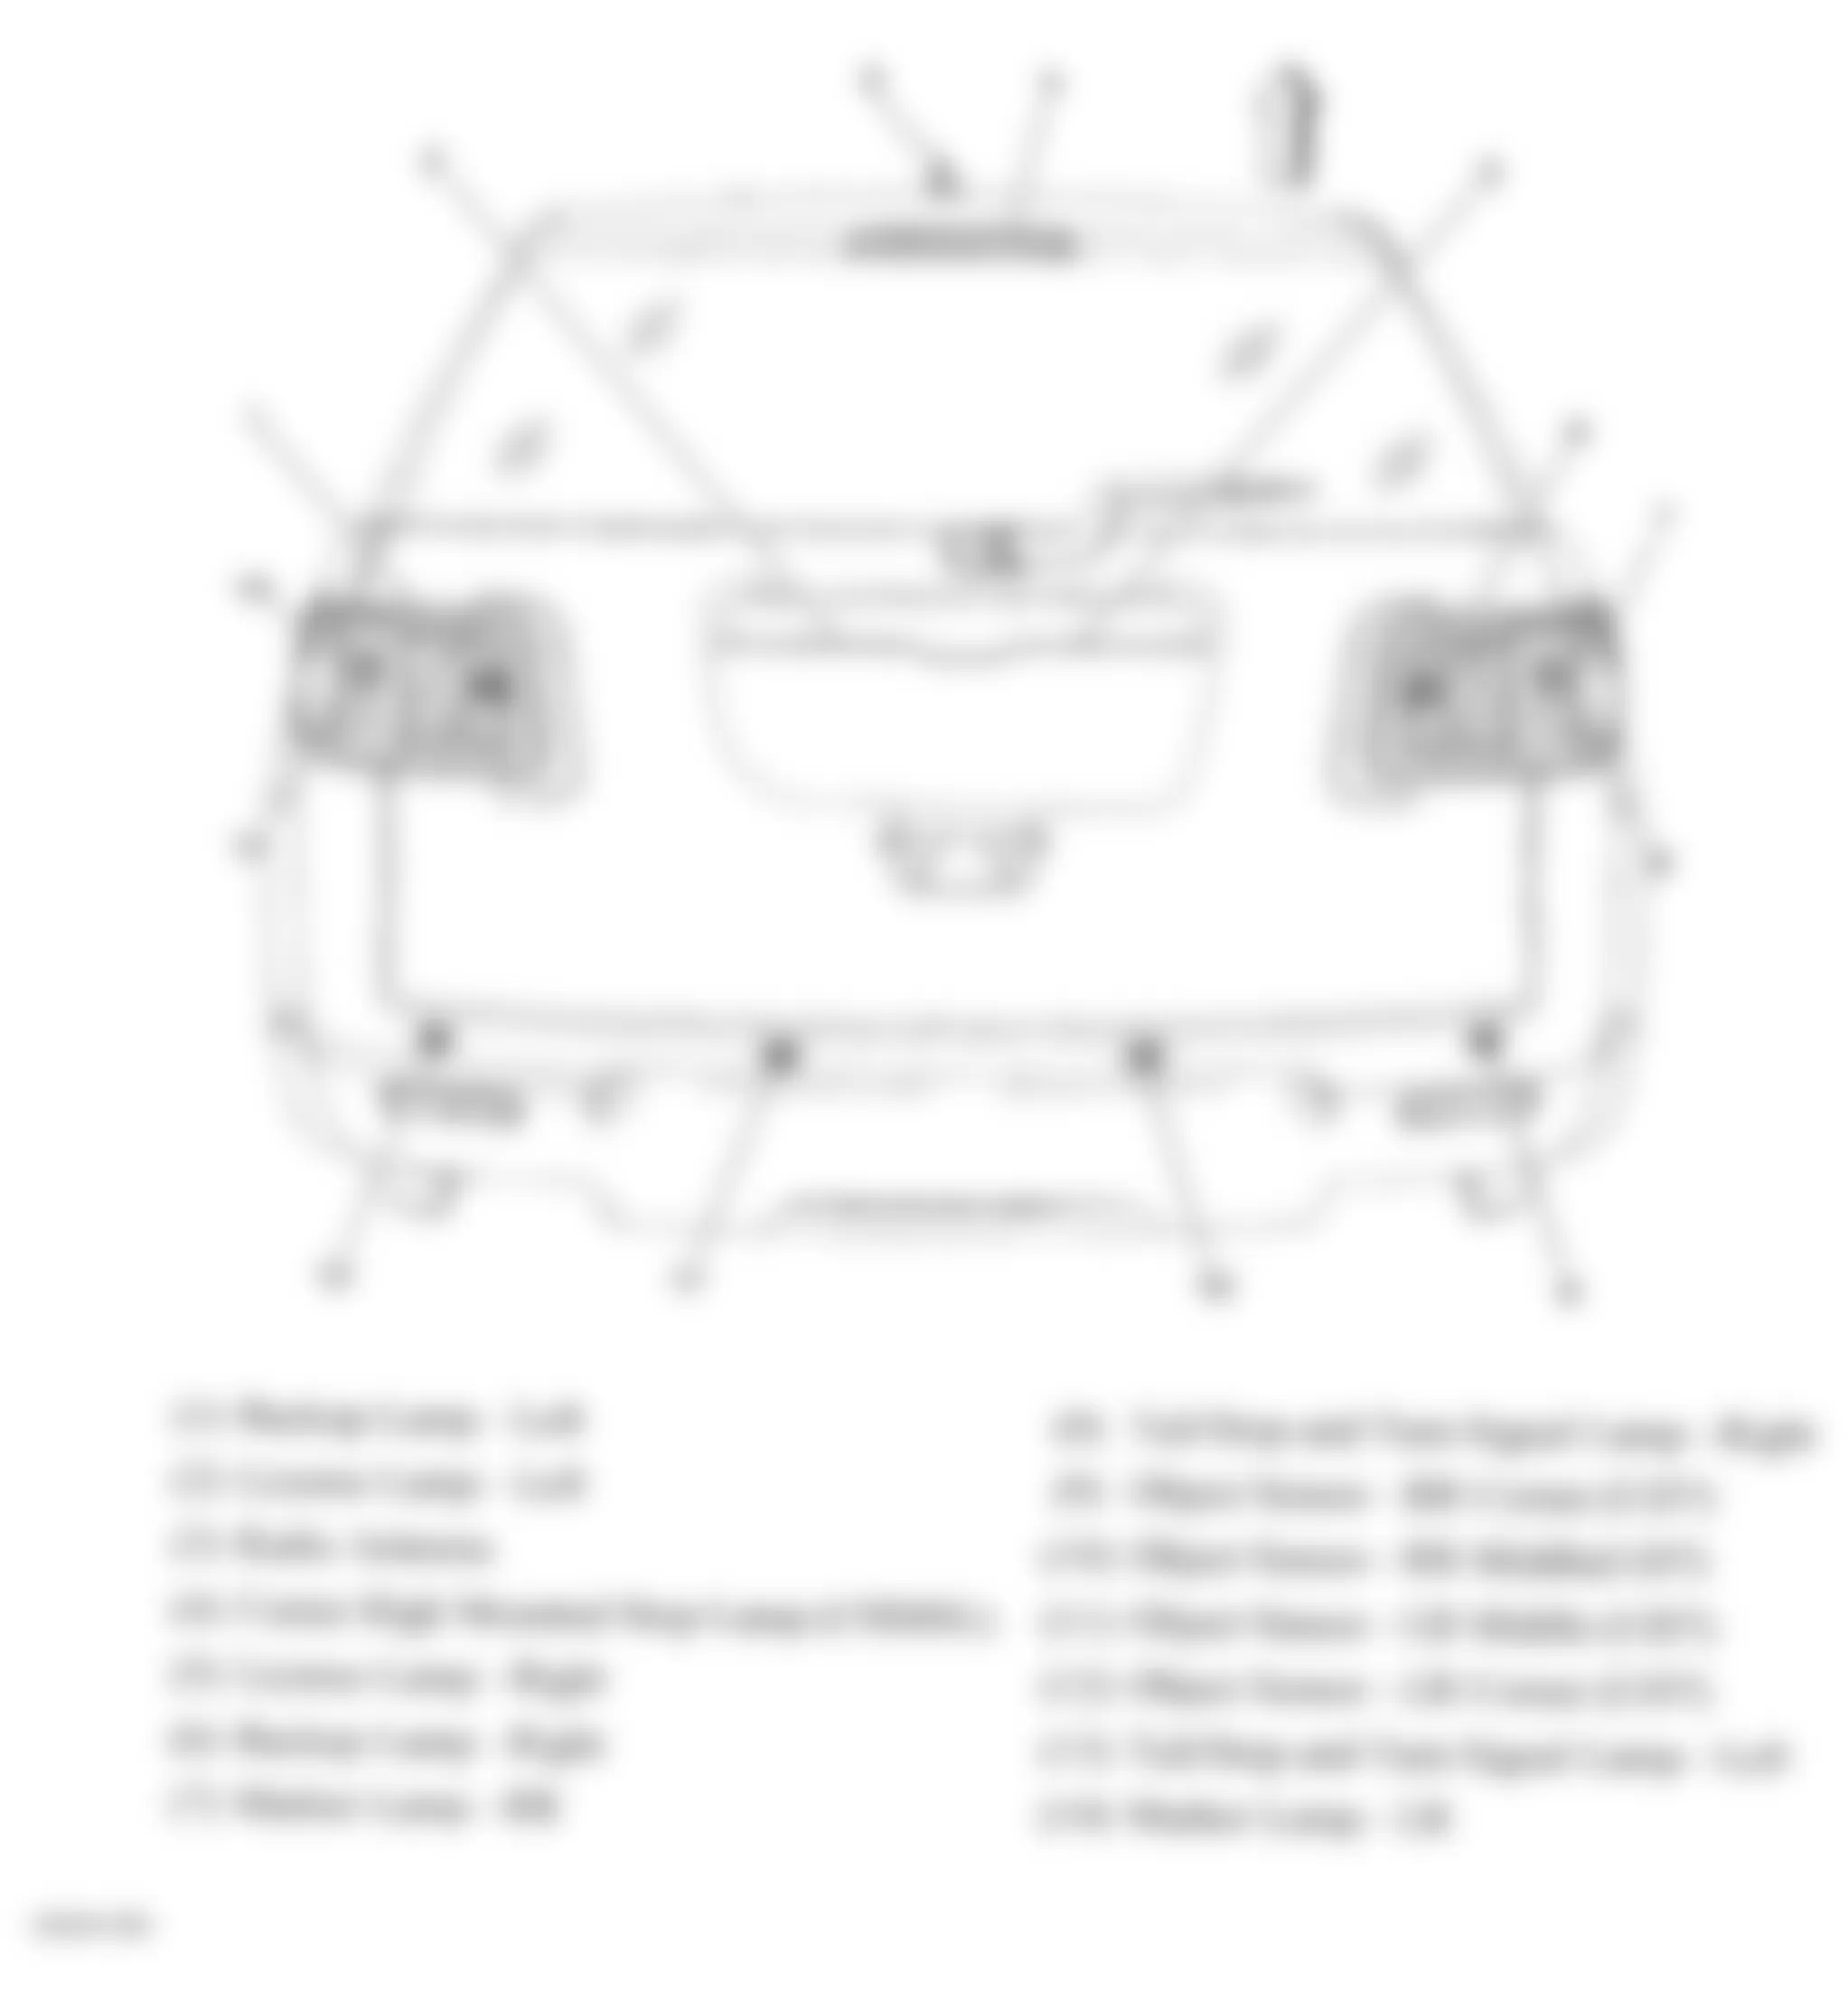 GMC Acadia SLE 2007 - Component Locations -  Rear Of Vehicle (Outlook)